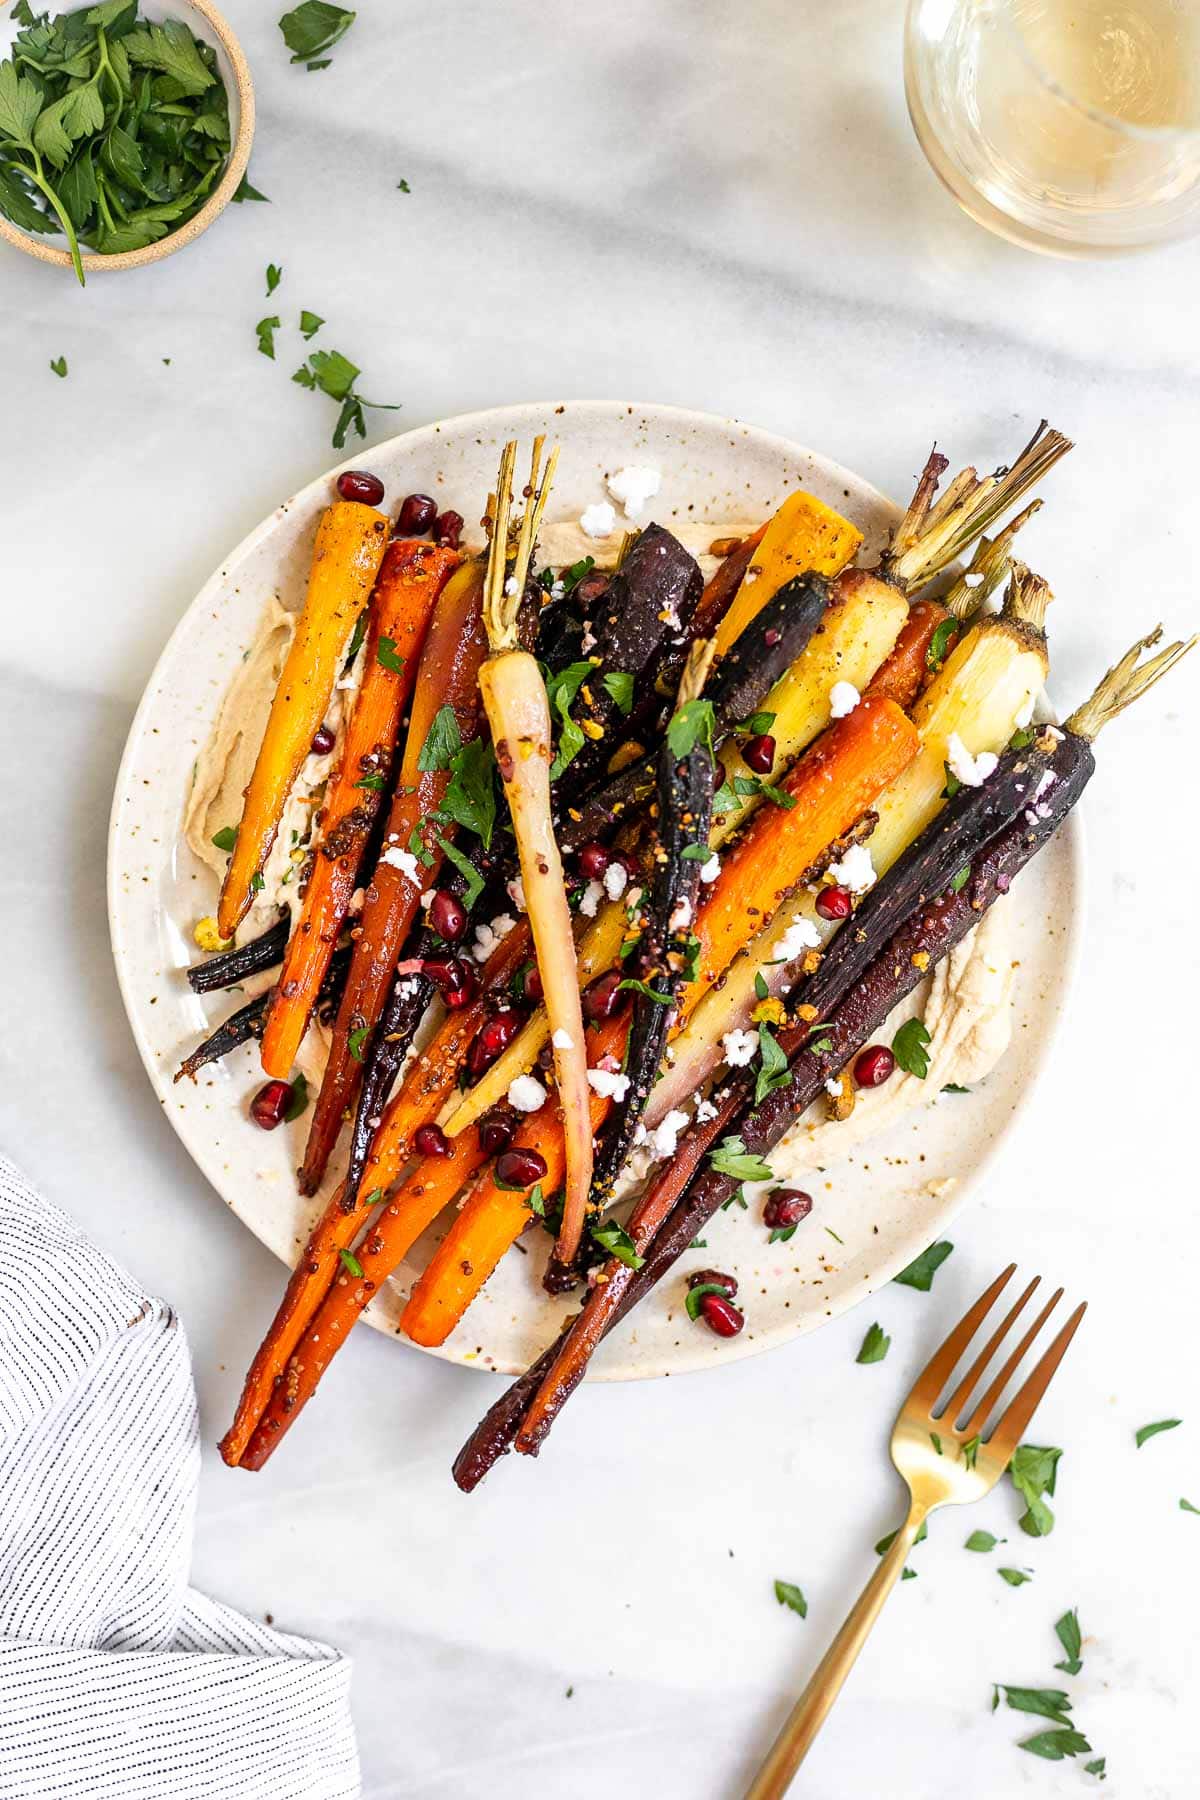 Roasted veggies on a plate with pomegranate on top.